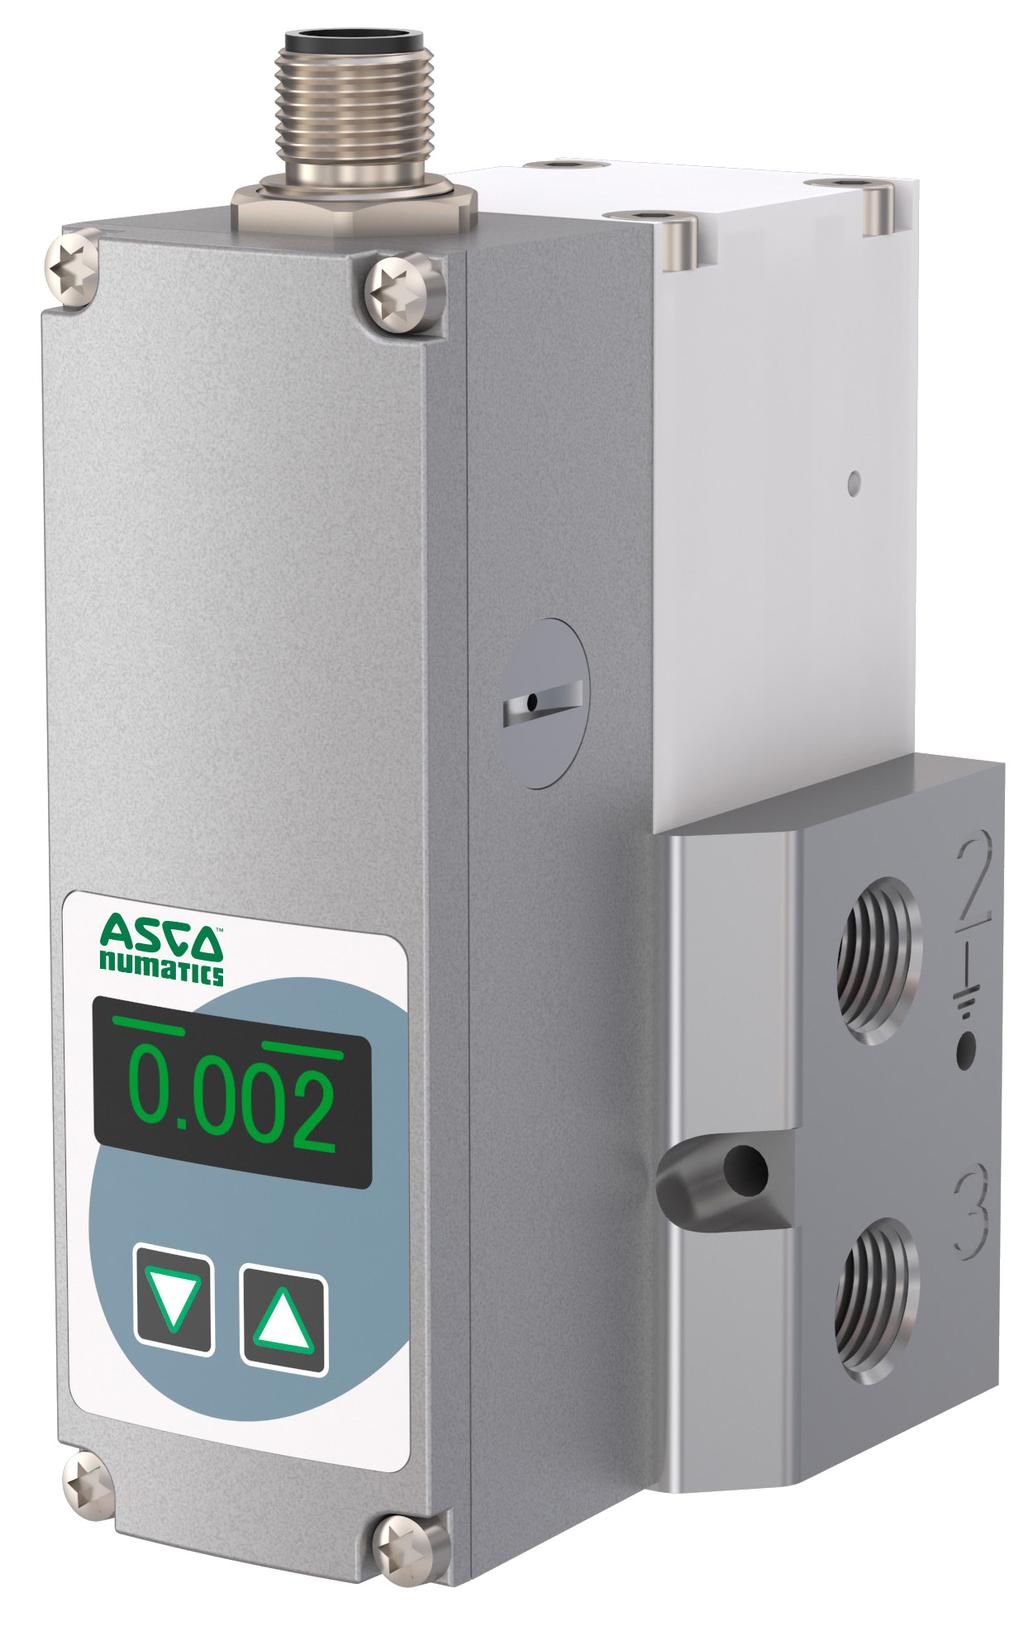 PROPORTIONAL PRESSURE CONTROL: 617 SERIES SENTRONIC LP IO-LINK VERSION ASCO NUMATICS Sentronic LP The Sentronic LP is a highly efficient and cost-effective option for your pressure regulation